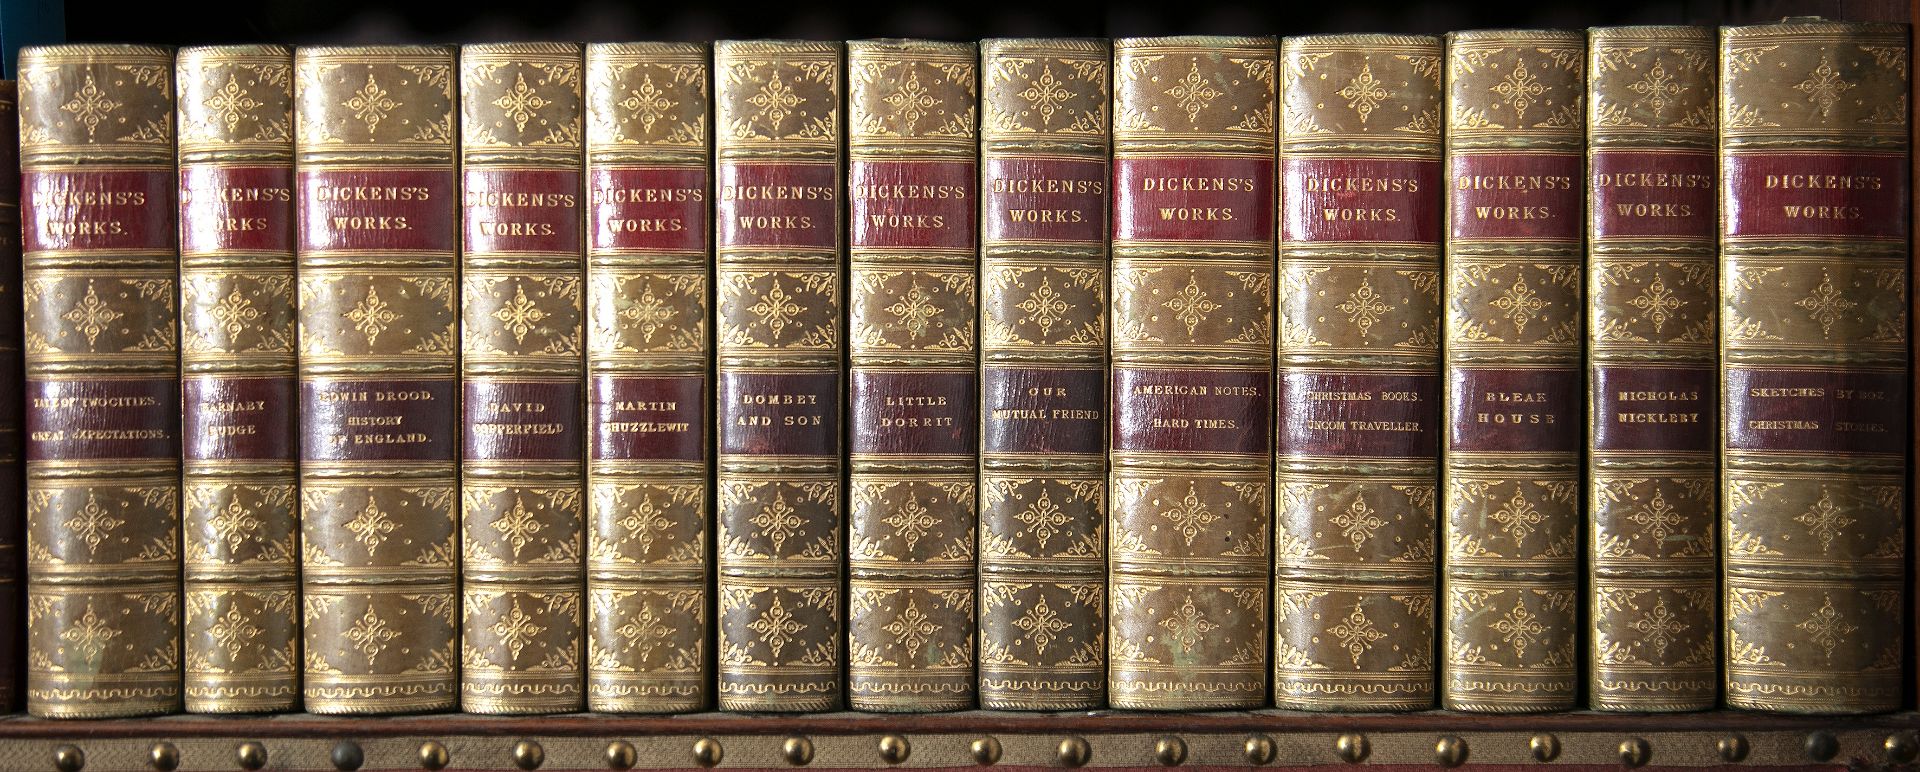 Dickens (Charles). Works Thereof in fourteen vols. Chapman and Hall c1890. Half green calf and